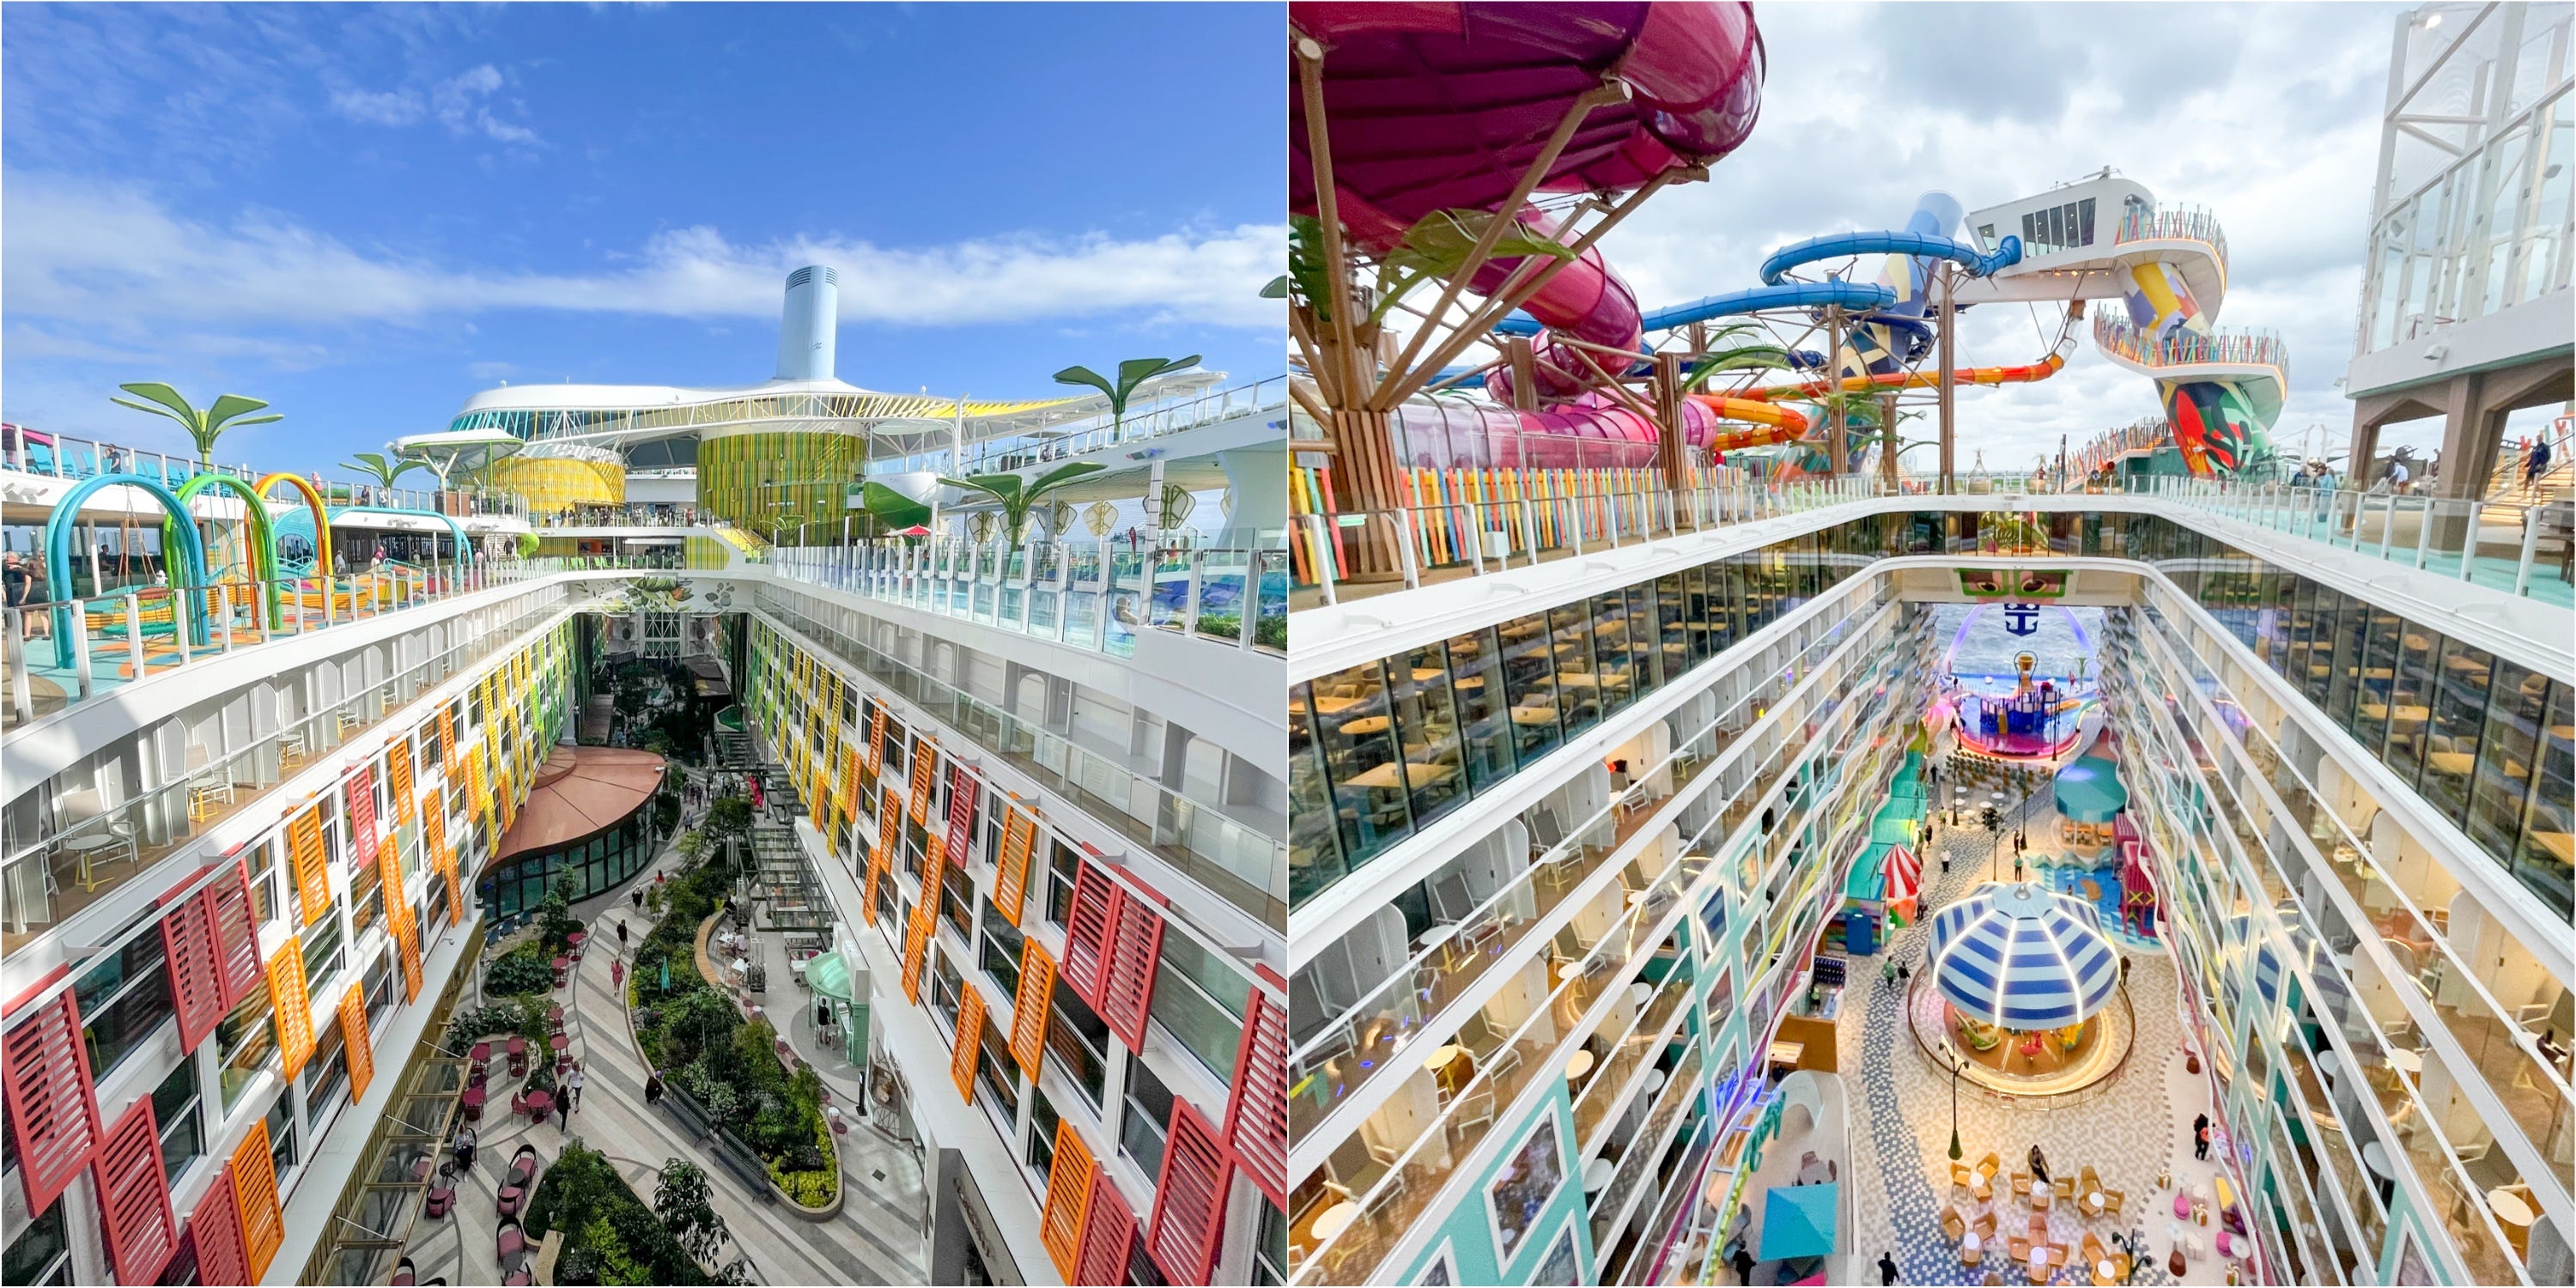 <p>If your family is looking for a jam-packed kid-friendly cruise with enough amenities to stay entertained for a week, both ships are a great option.</p><p>But if you're a seasoned mega-ship-cruiser looking to experience something new, <a href="https://www.businessinsider.com/royal-caribbean-icon-of-the-seas-cruise-ship-design-instagram-2024-2">Icon of the Seas</a> is your best bet.</p><p>They may be similar, but no other behemoth cruise liner has a waterpark for children and a pool club for adults just dozens of feet from each other. </p>